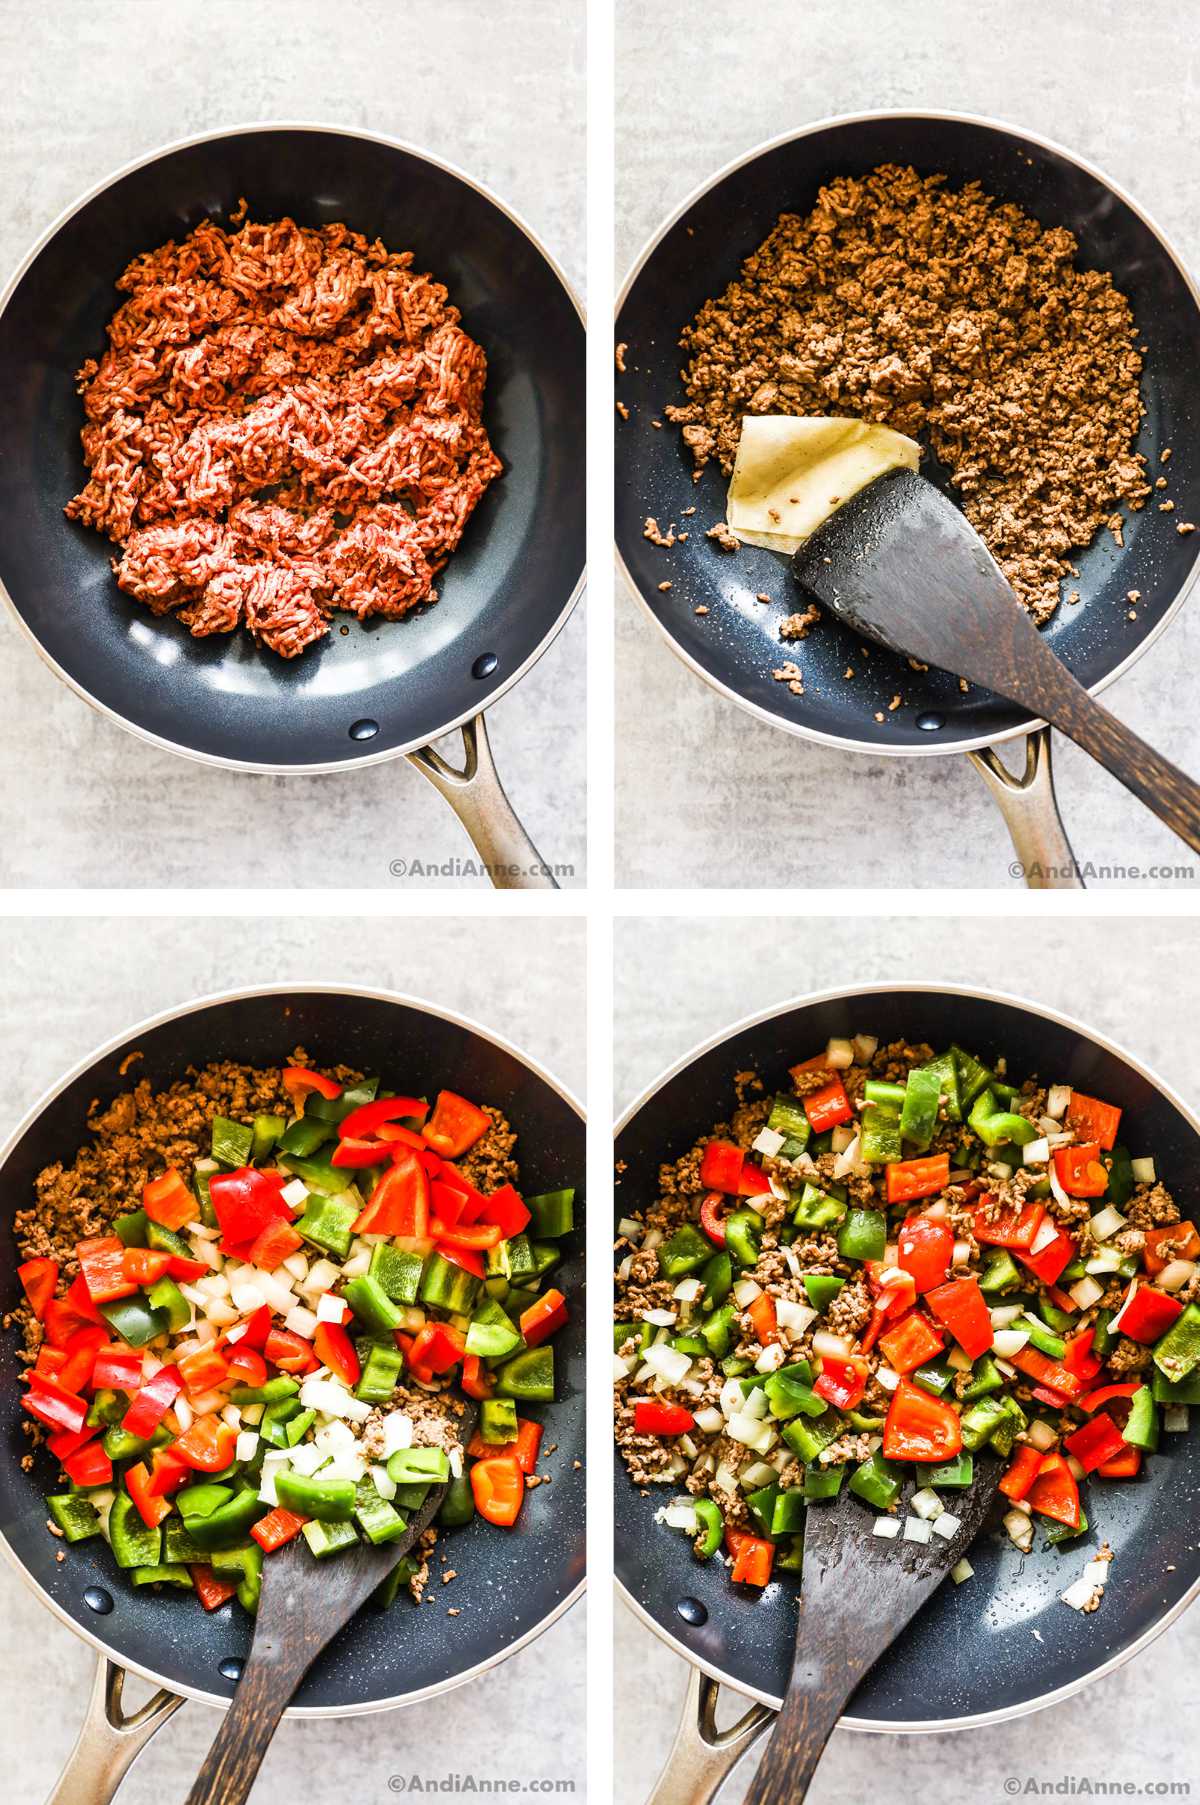 Four overhead images in one: 1. Raw ground beef in frying pan. 2. Seared ground beef in frying pan with paper towel pushed by wooden spoon. 3. Vegetables added to beef in frying pan. 4. Vegetables cooked and mixed in with ground beef in frying pan. 